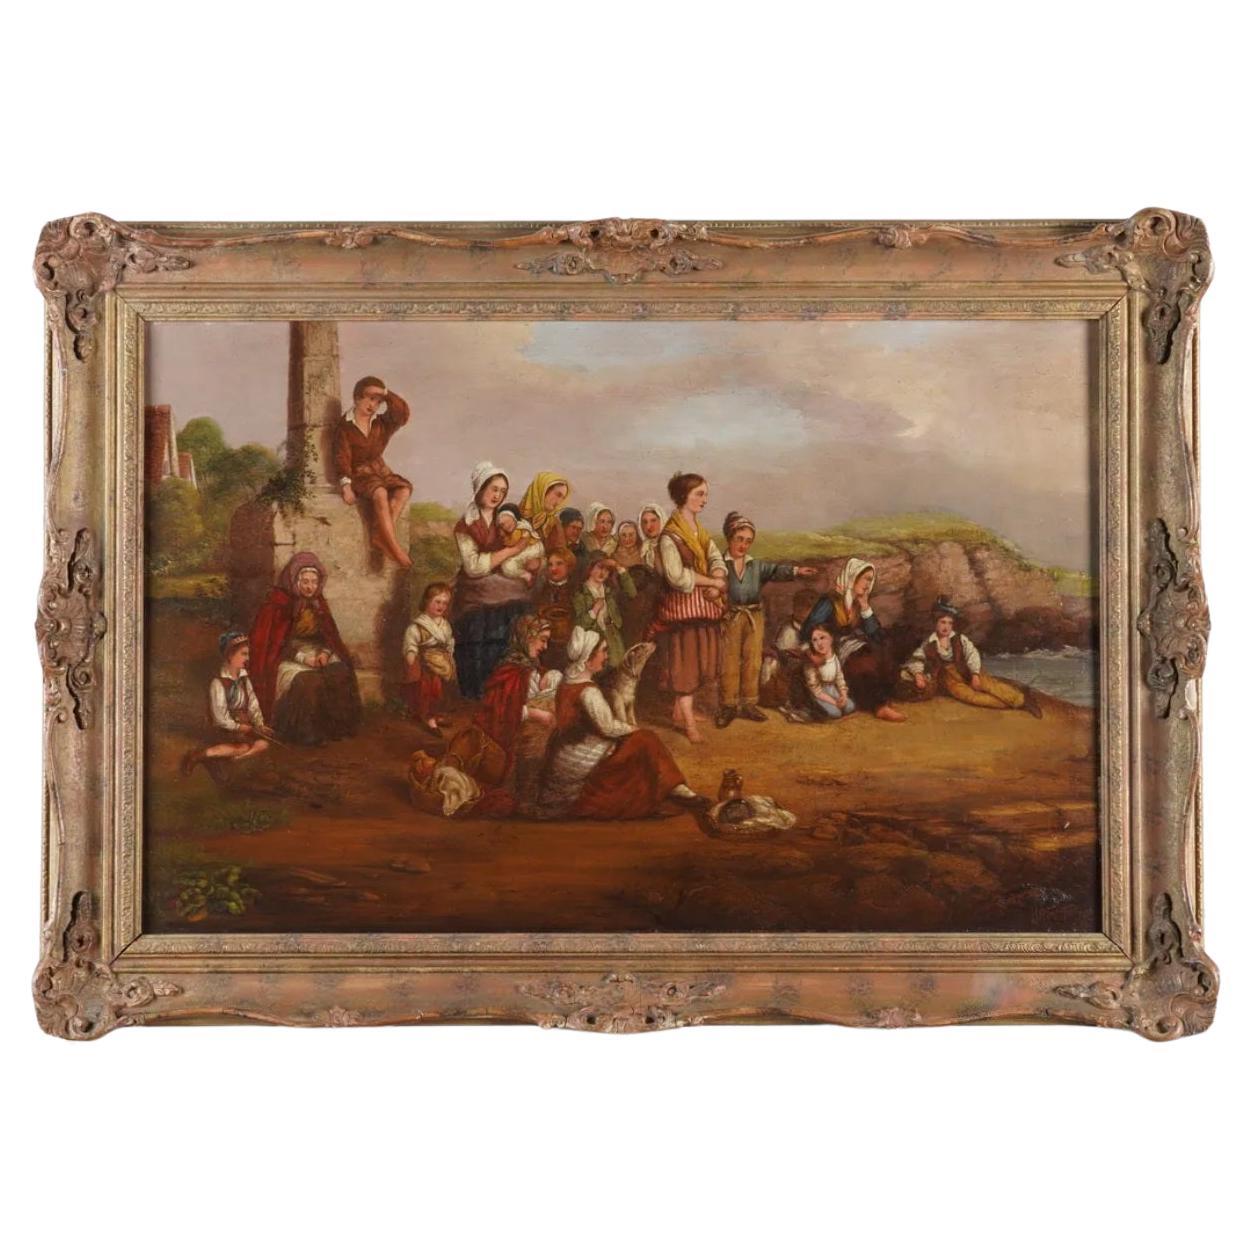 EXQUISITE ORiGINAL W.G FOSTER LARGE OIL PAINTING "WAITING FOR THE FLEETS RETURN" For Sale